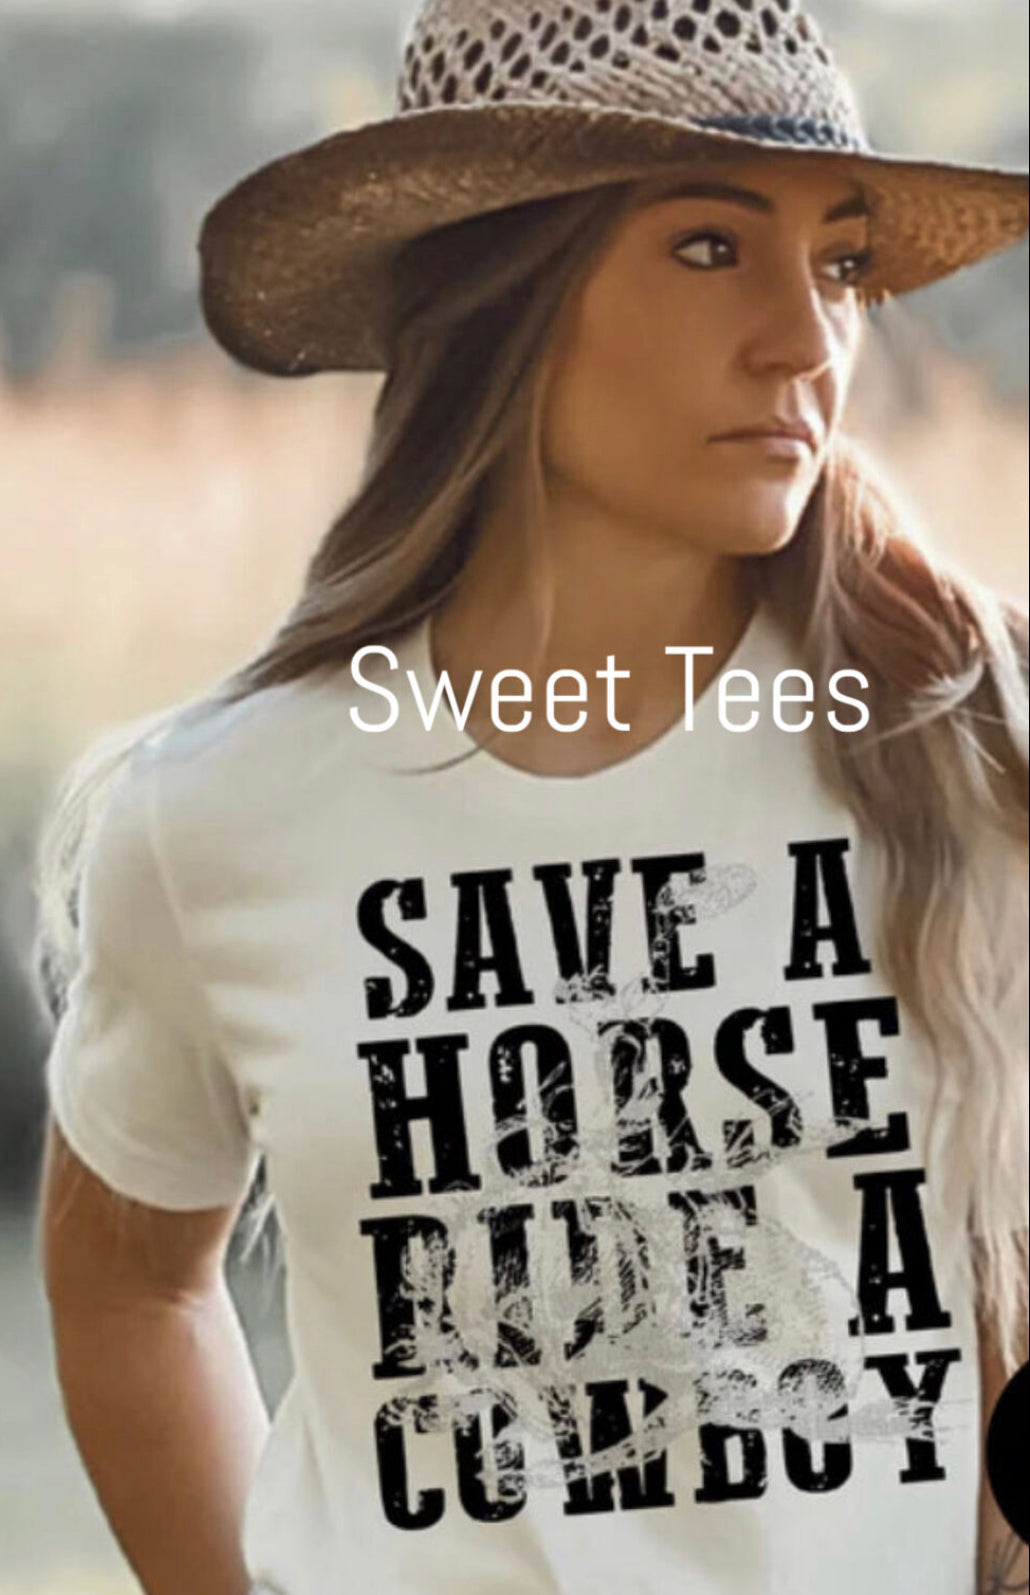 Save a Horse